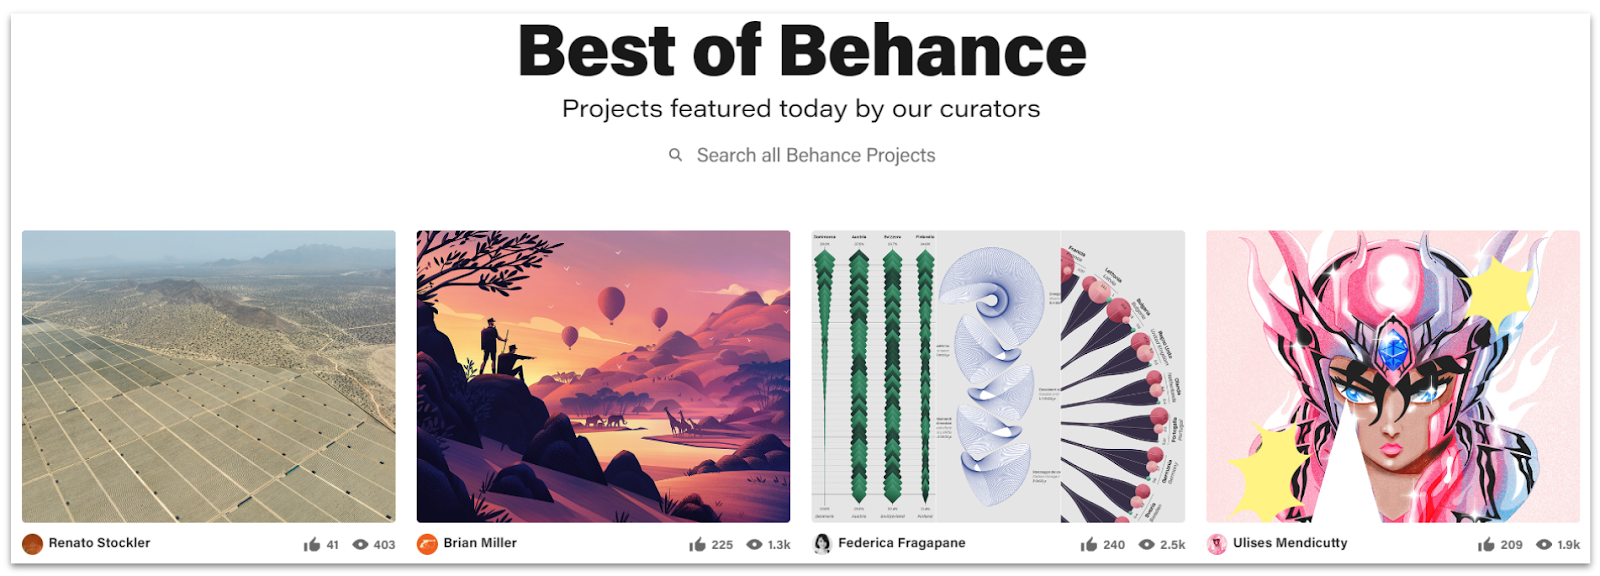 Behance discover page